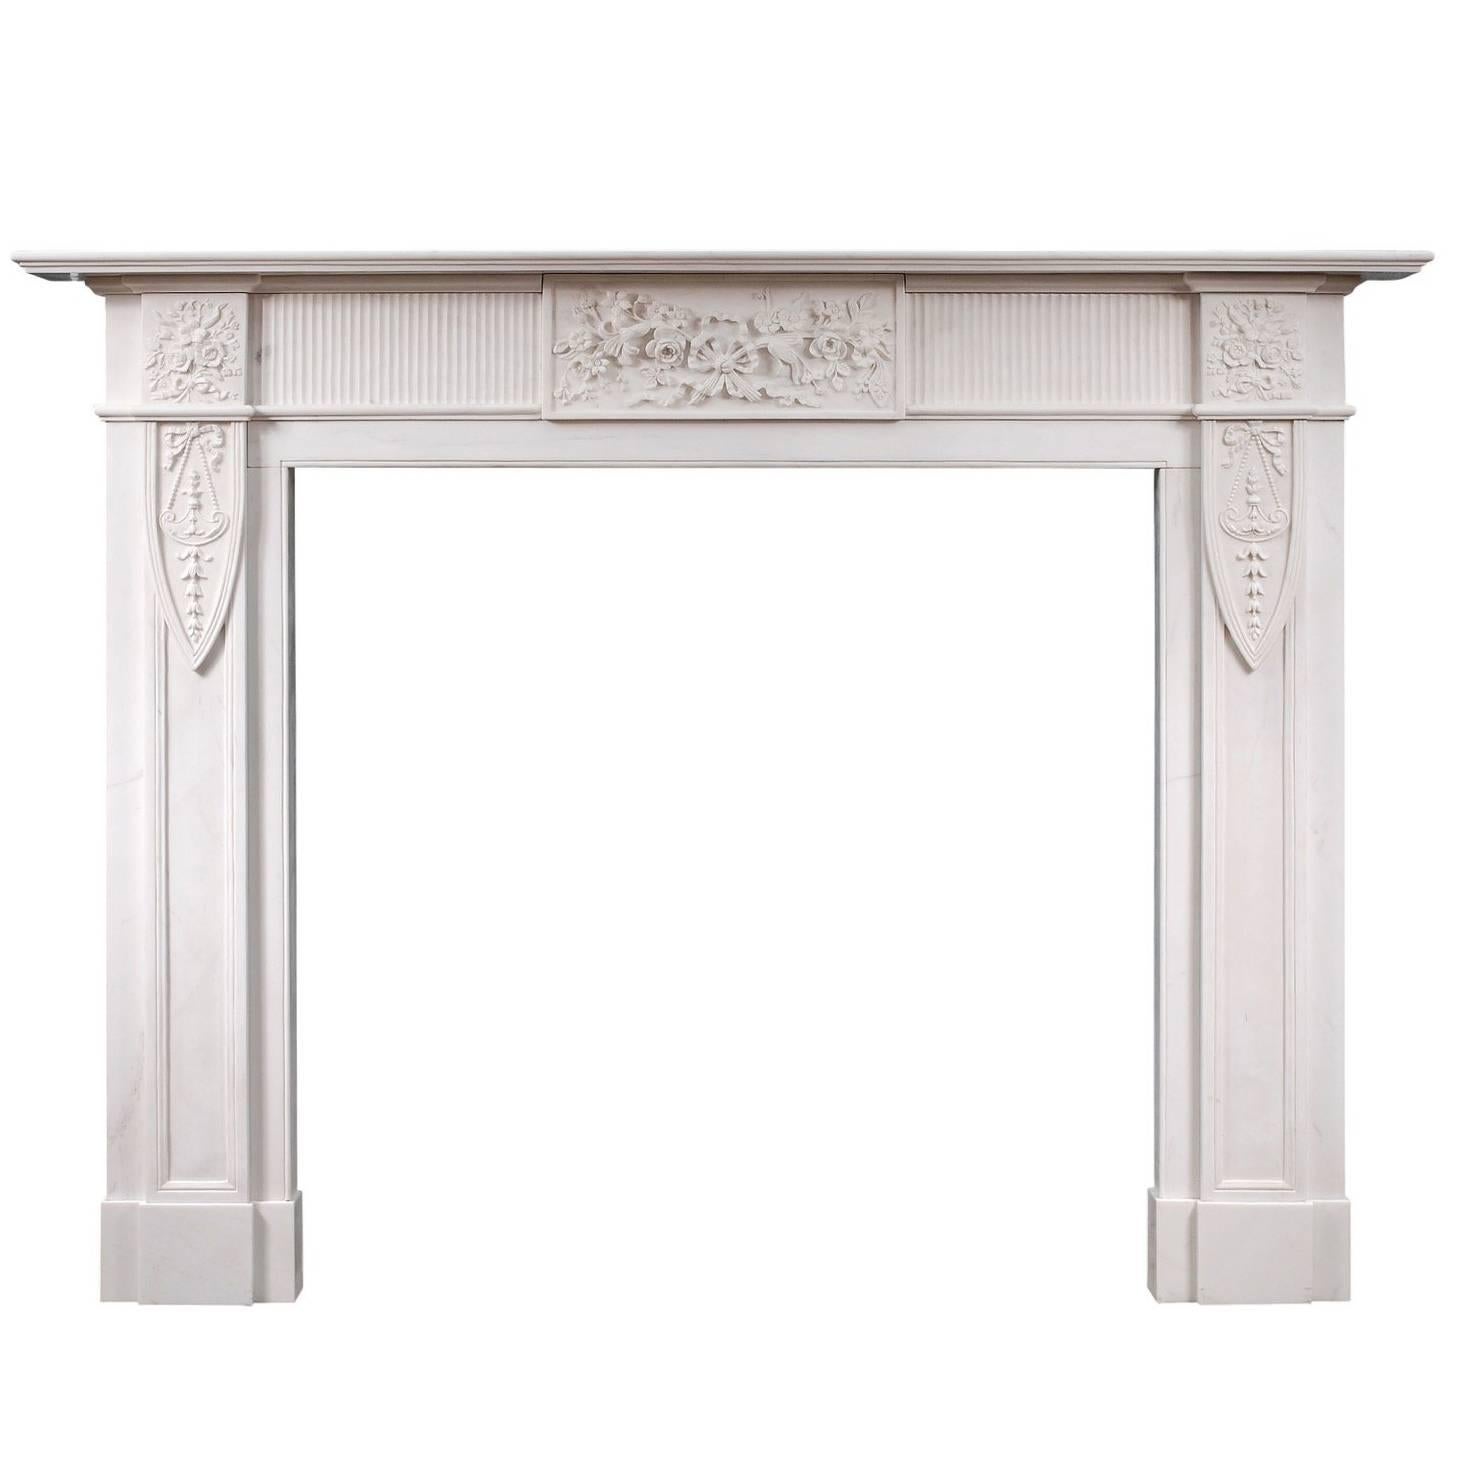 English Marble Fireplace in the Georgian Style For Sale